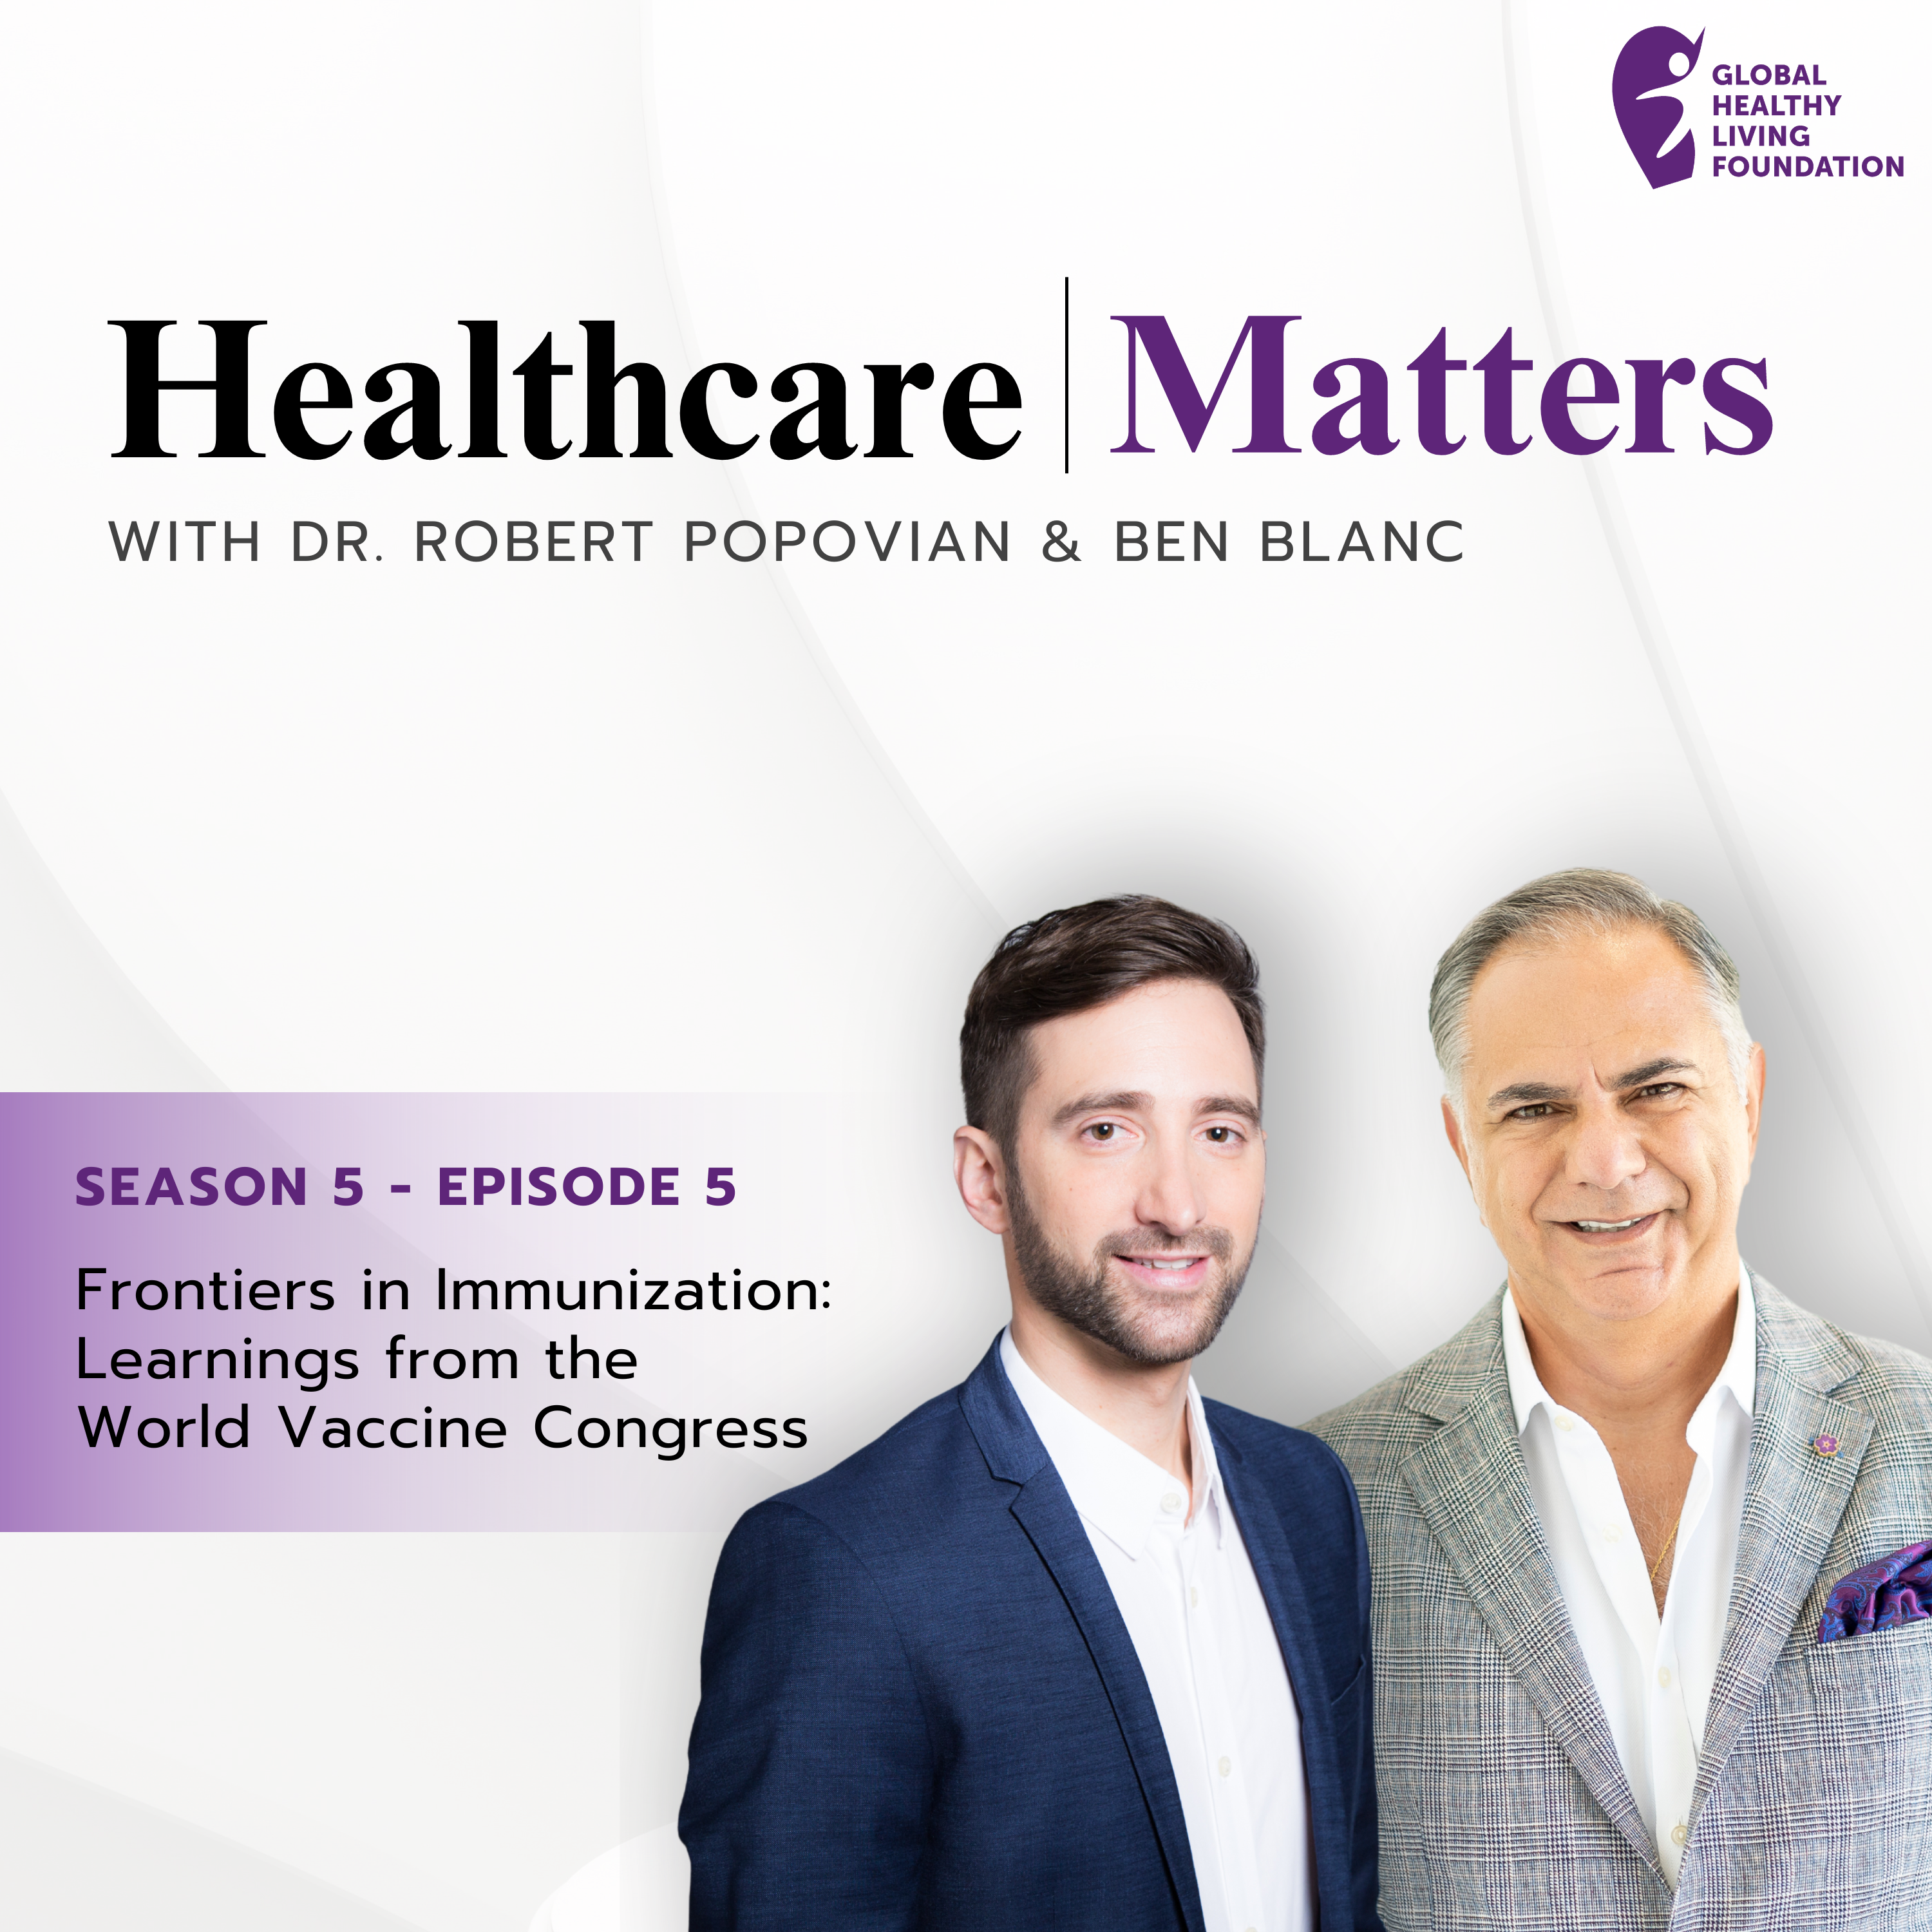 S5, Ep 5- Frontiers in Immunization: Learnings from the World Vaccine Congress